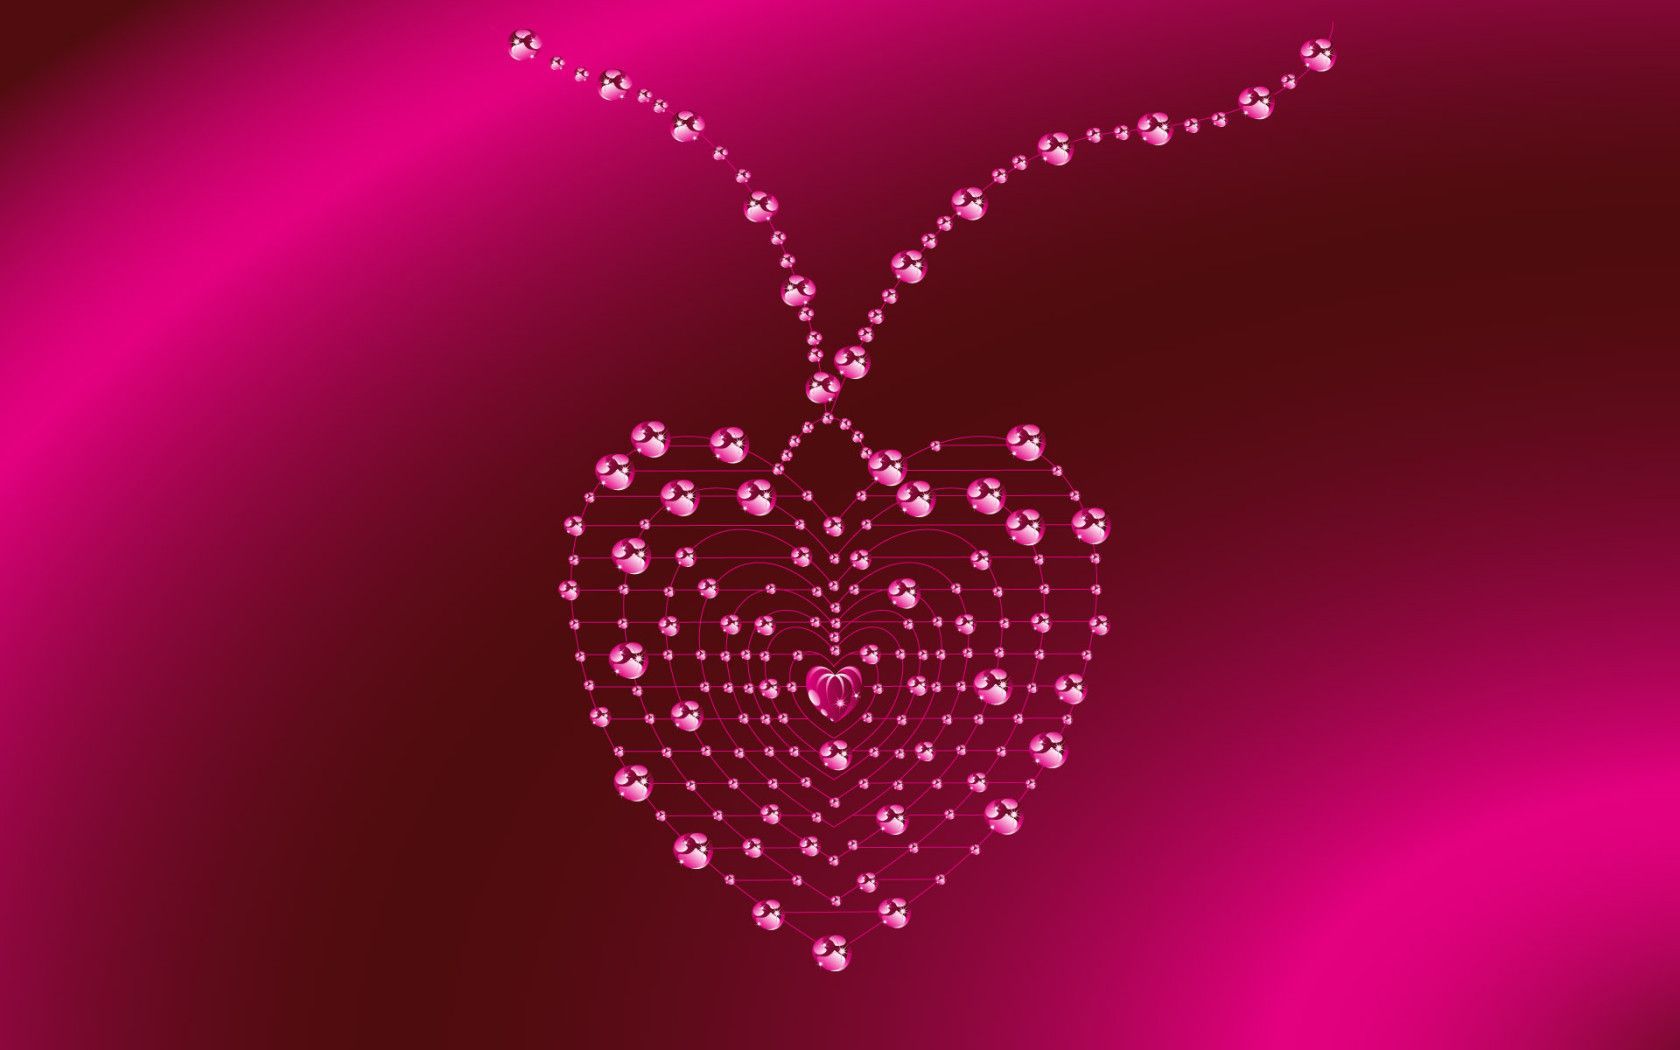 Free Wallpaper of a Pink Necklace | Free Wallpaper World